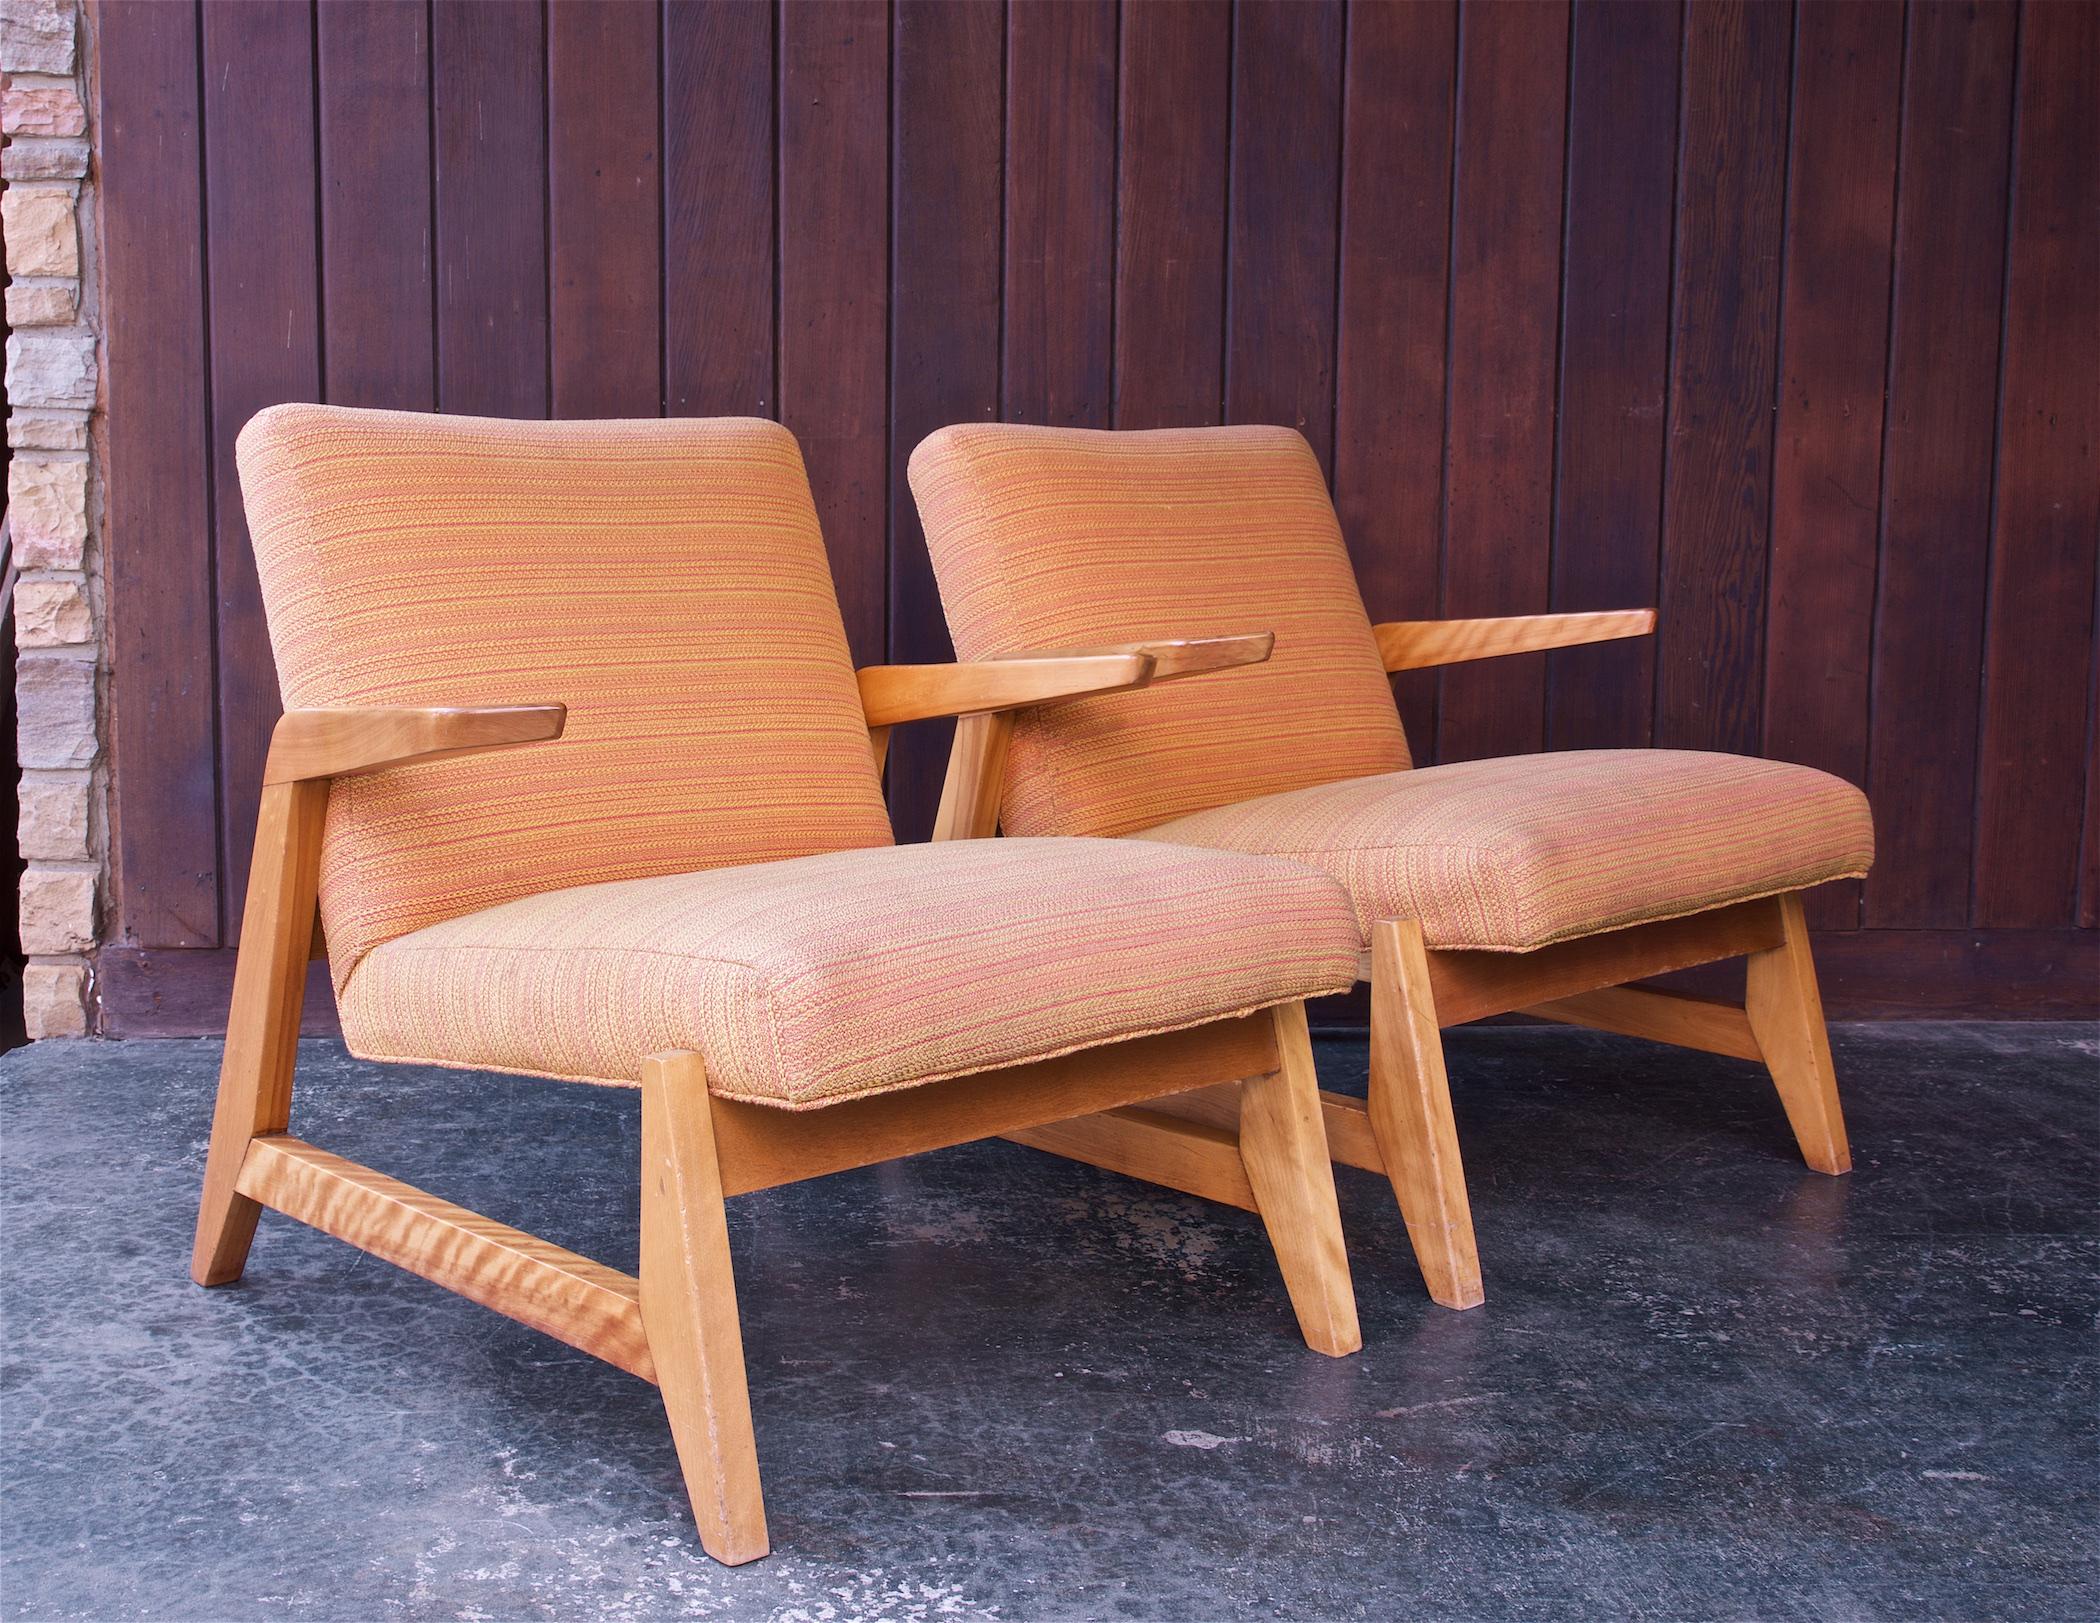 Very uncommon pair of early Knoll chairs, designed by architect Ralph Rapson.  Rapson designed a series of furniture that Knoll & Associates produced in the late 1940's.

These chairs are in unrestored condition.  We would advise restoration and